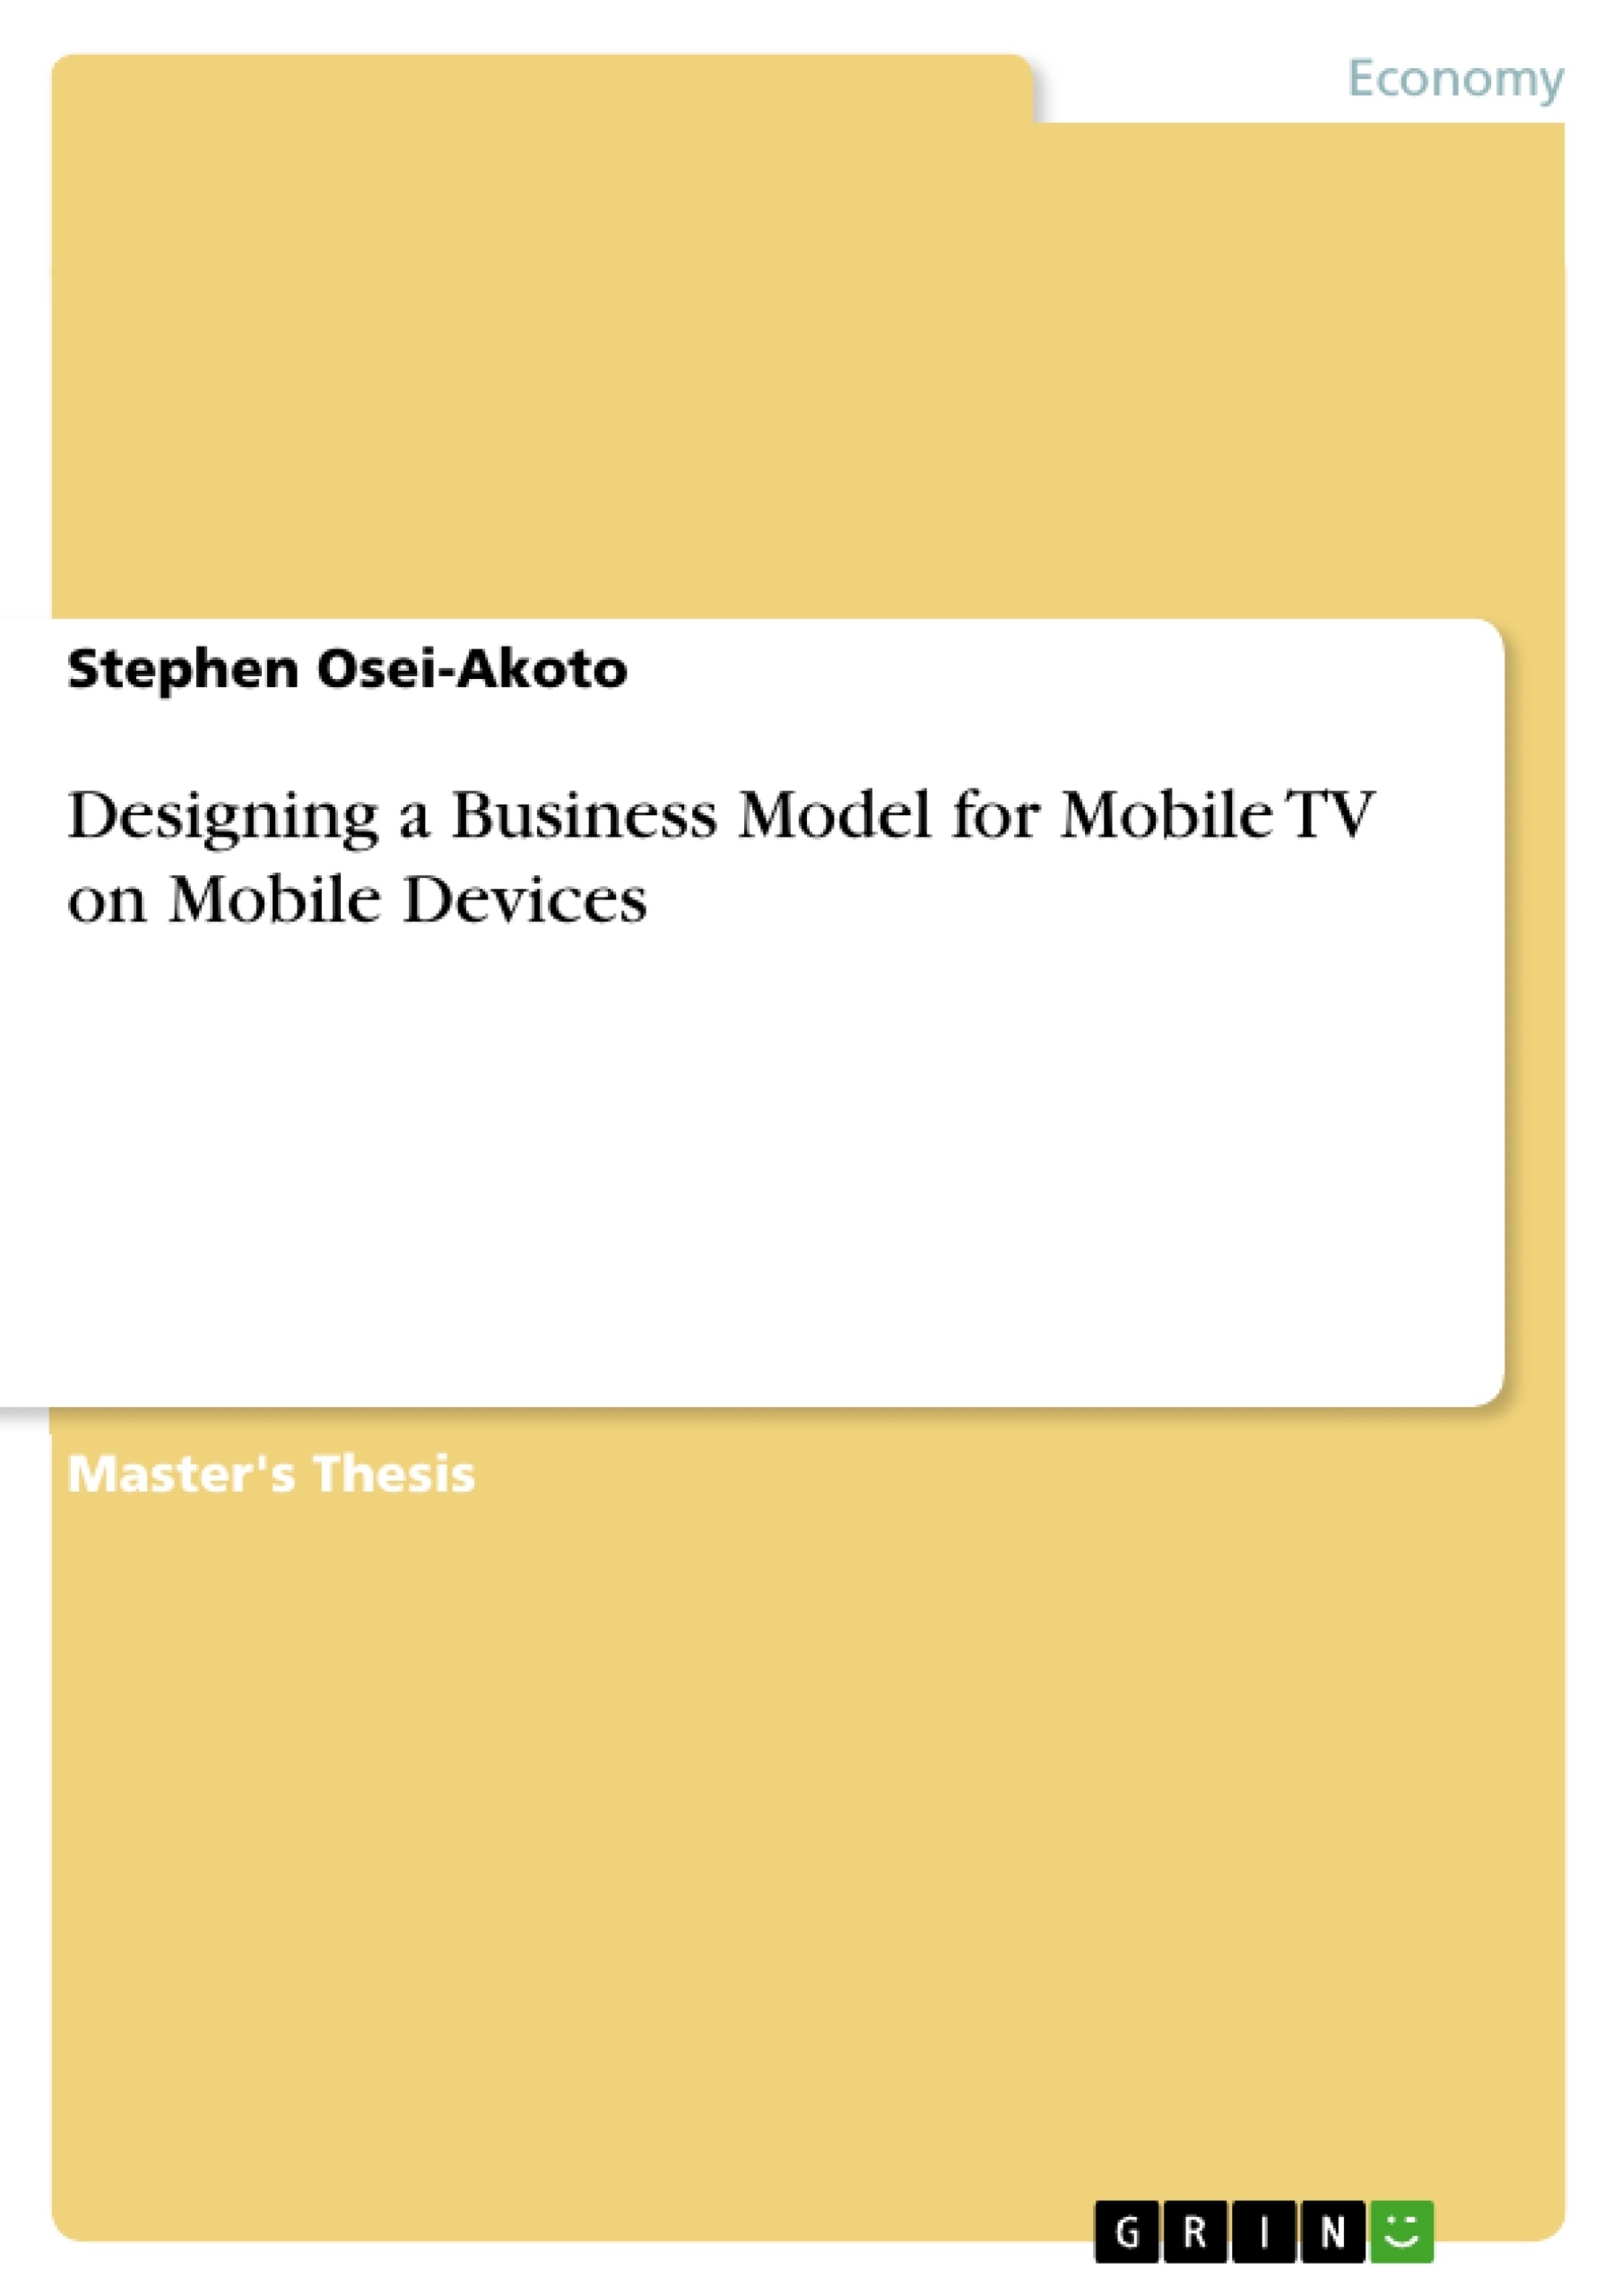 Titre: Designing a Business Model for Mobile TV on Mobile Devices